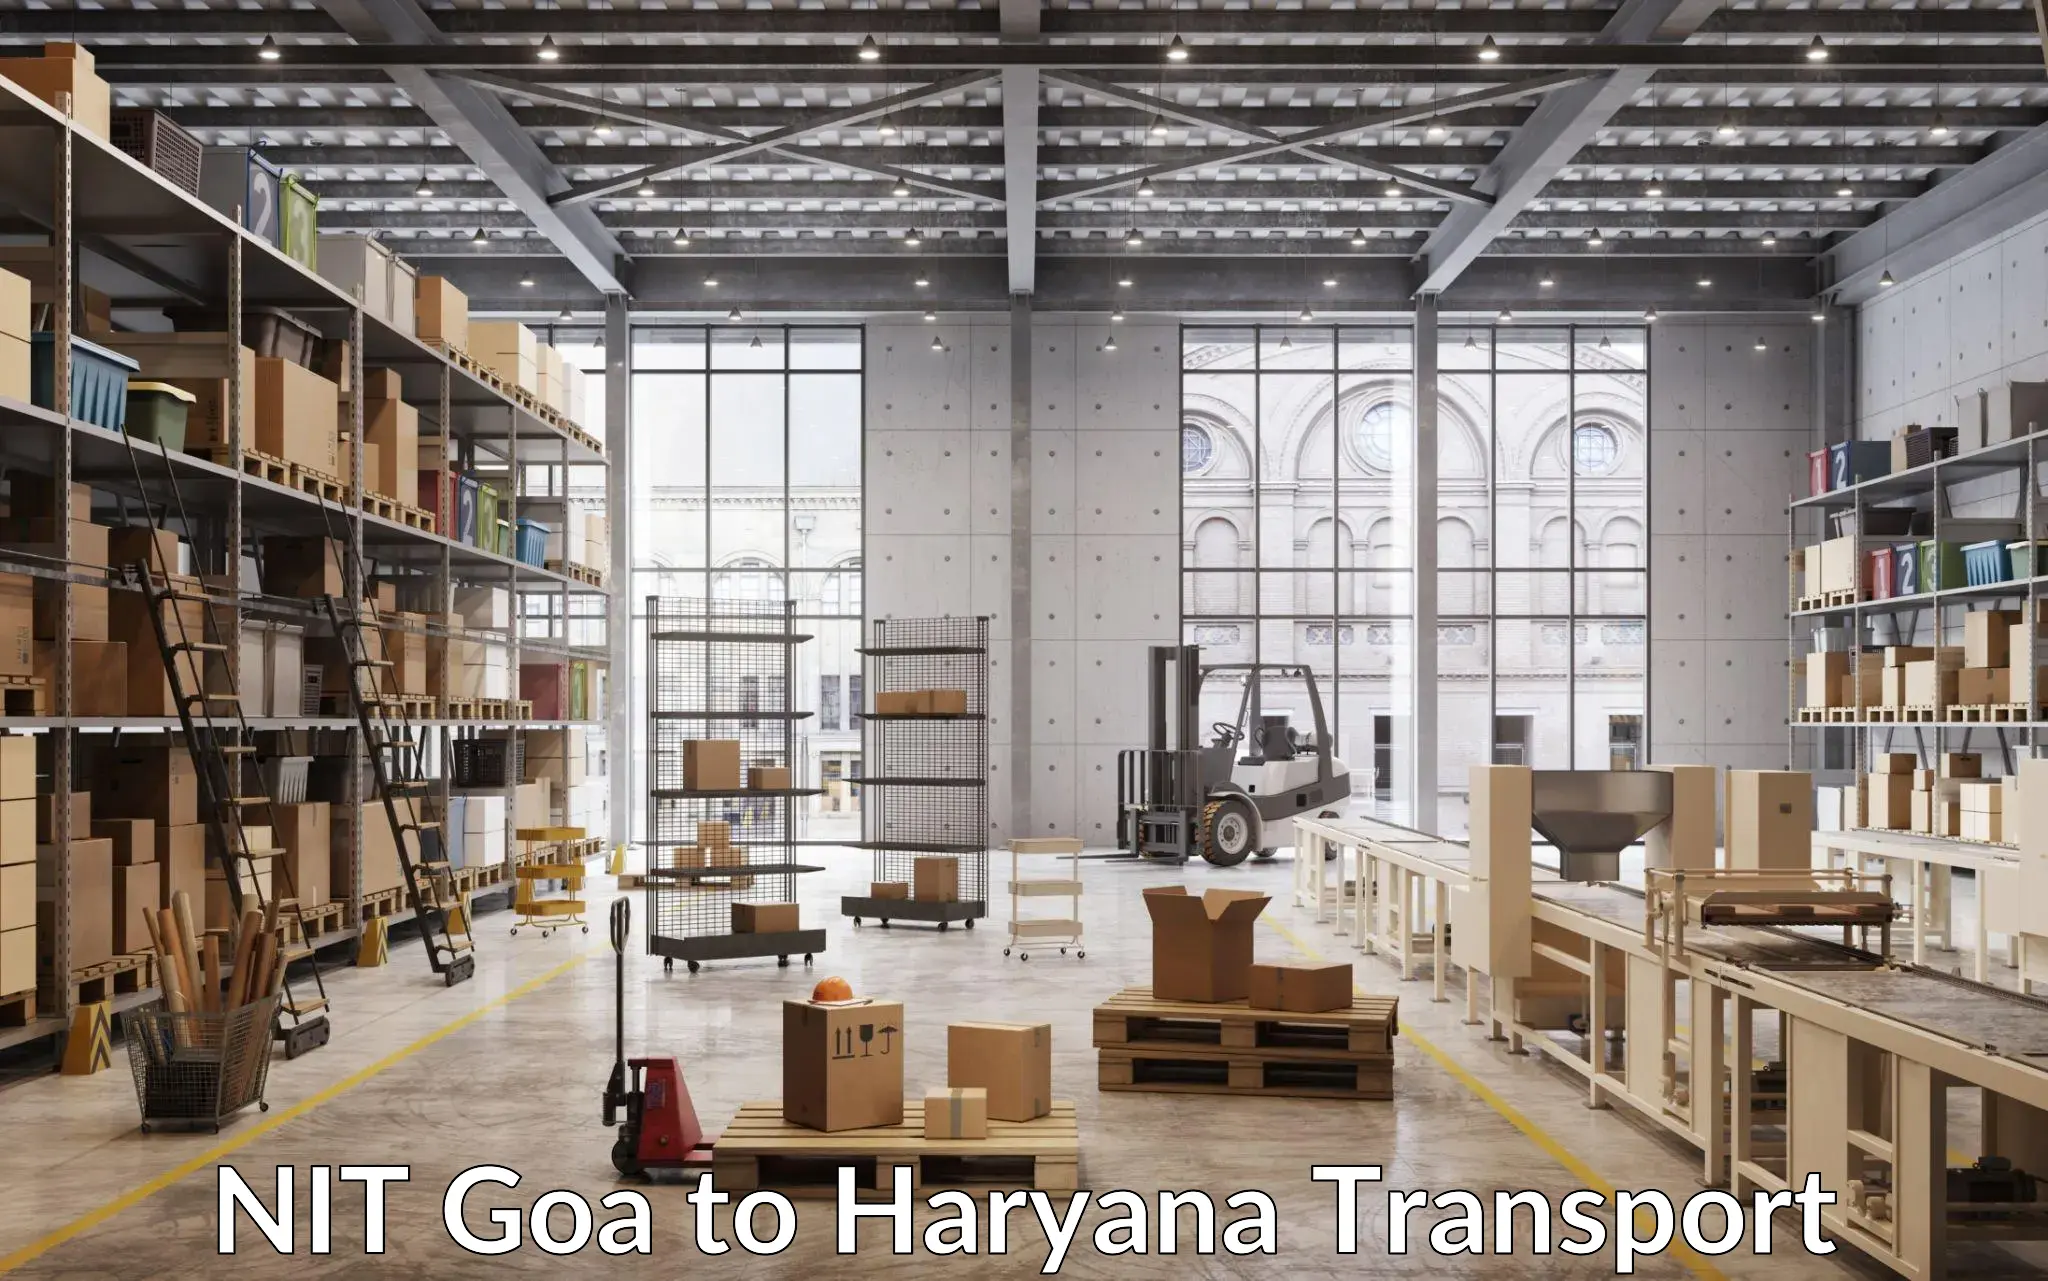 Parcel transport services NIT Goa to Haryana